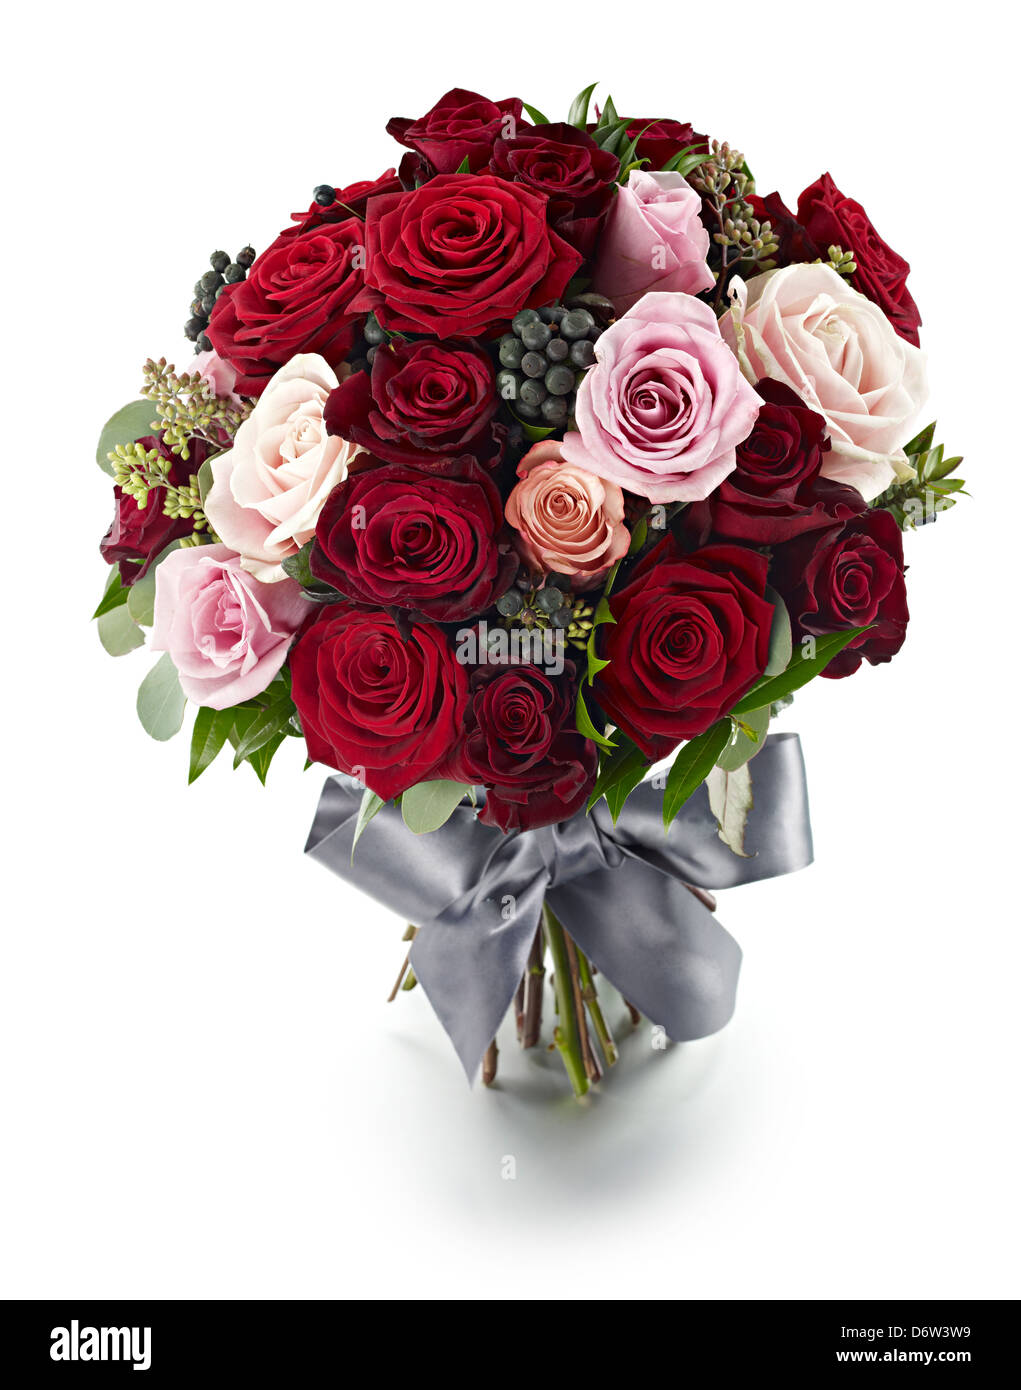 Red pink roses bouquet Stock Photo